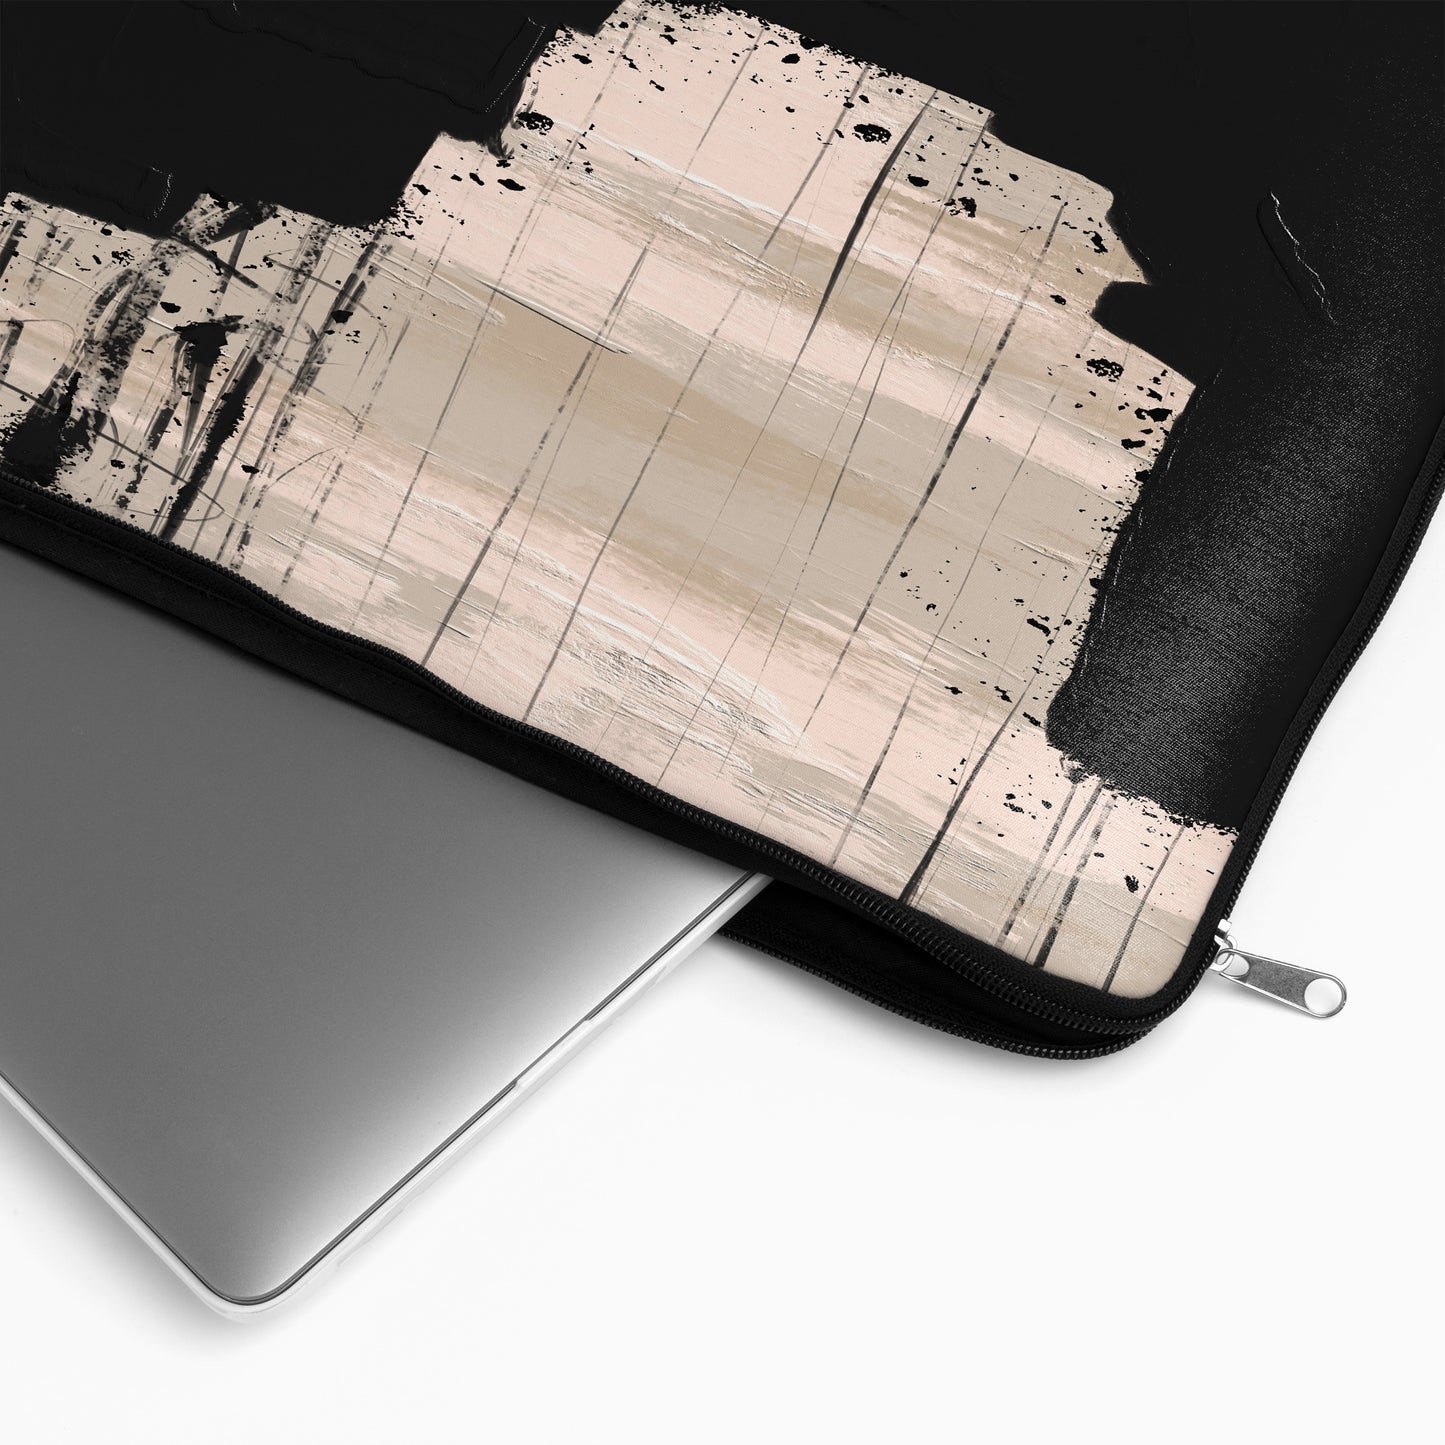 Painted Abstract Art - Laptop Sleeve